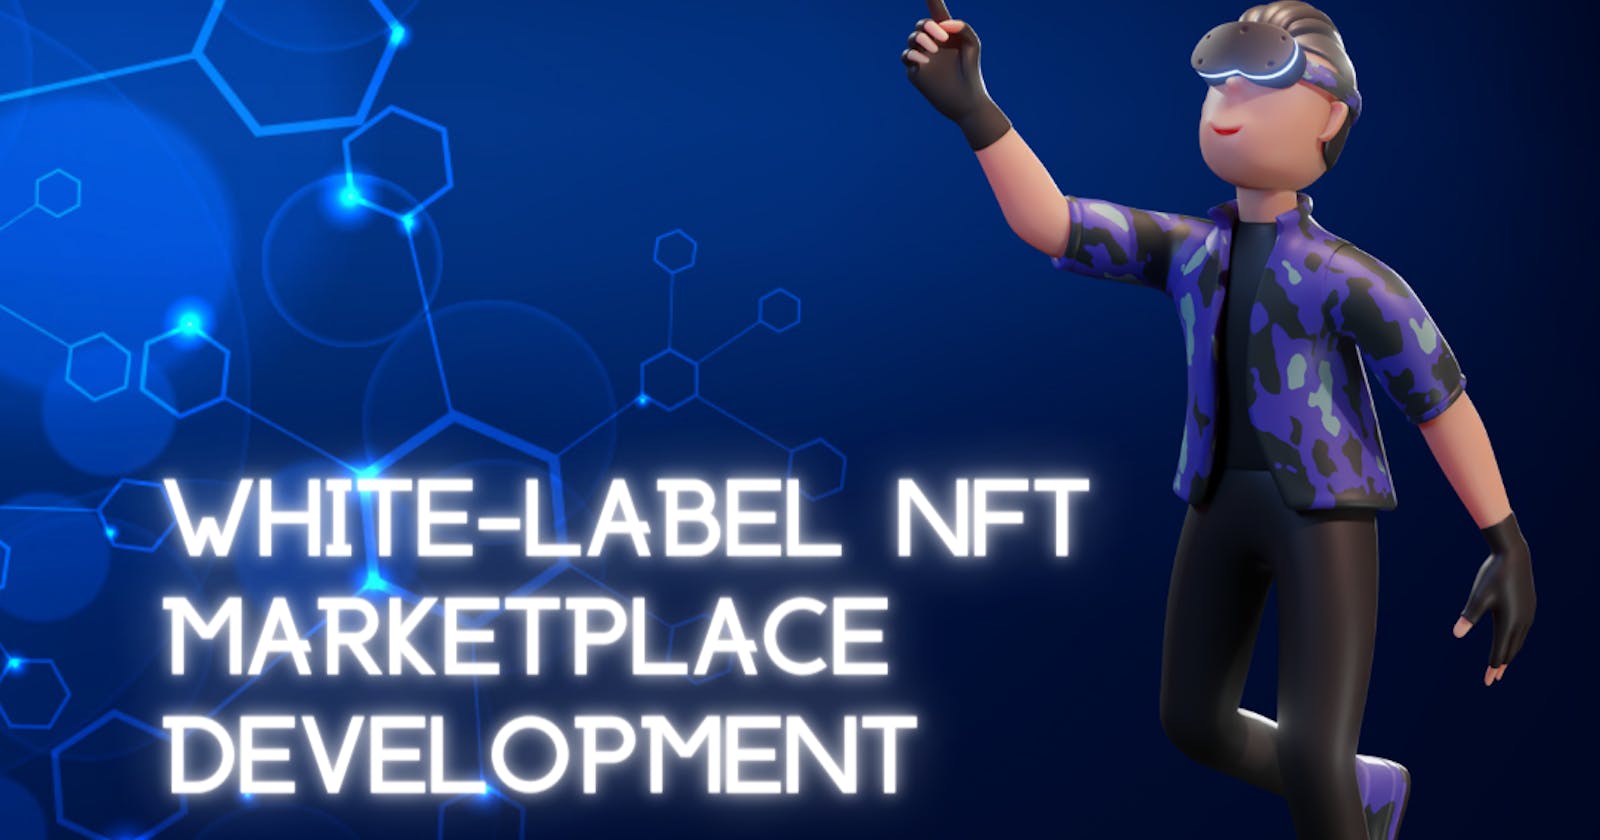 Get Ahead of the Game with a Customized White-label NFT Marketplace Development